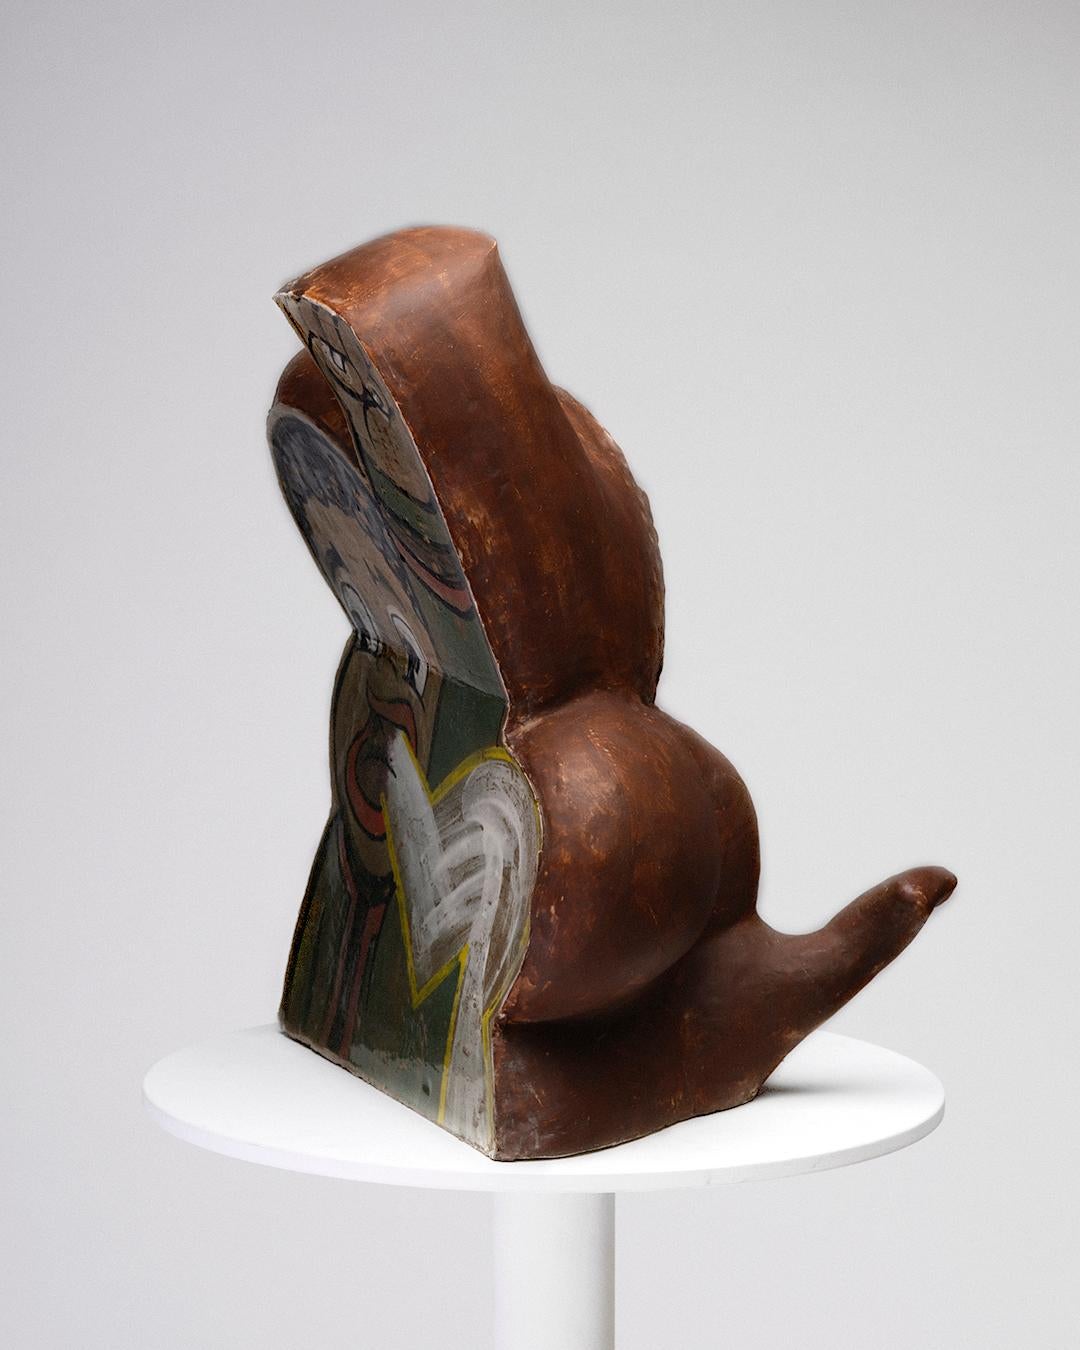 Malcolm Mobutu Smith
No More Words, 2021
Stoneware, slip and glaze
Measures: 13 x 16 x 23 in.